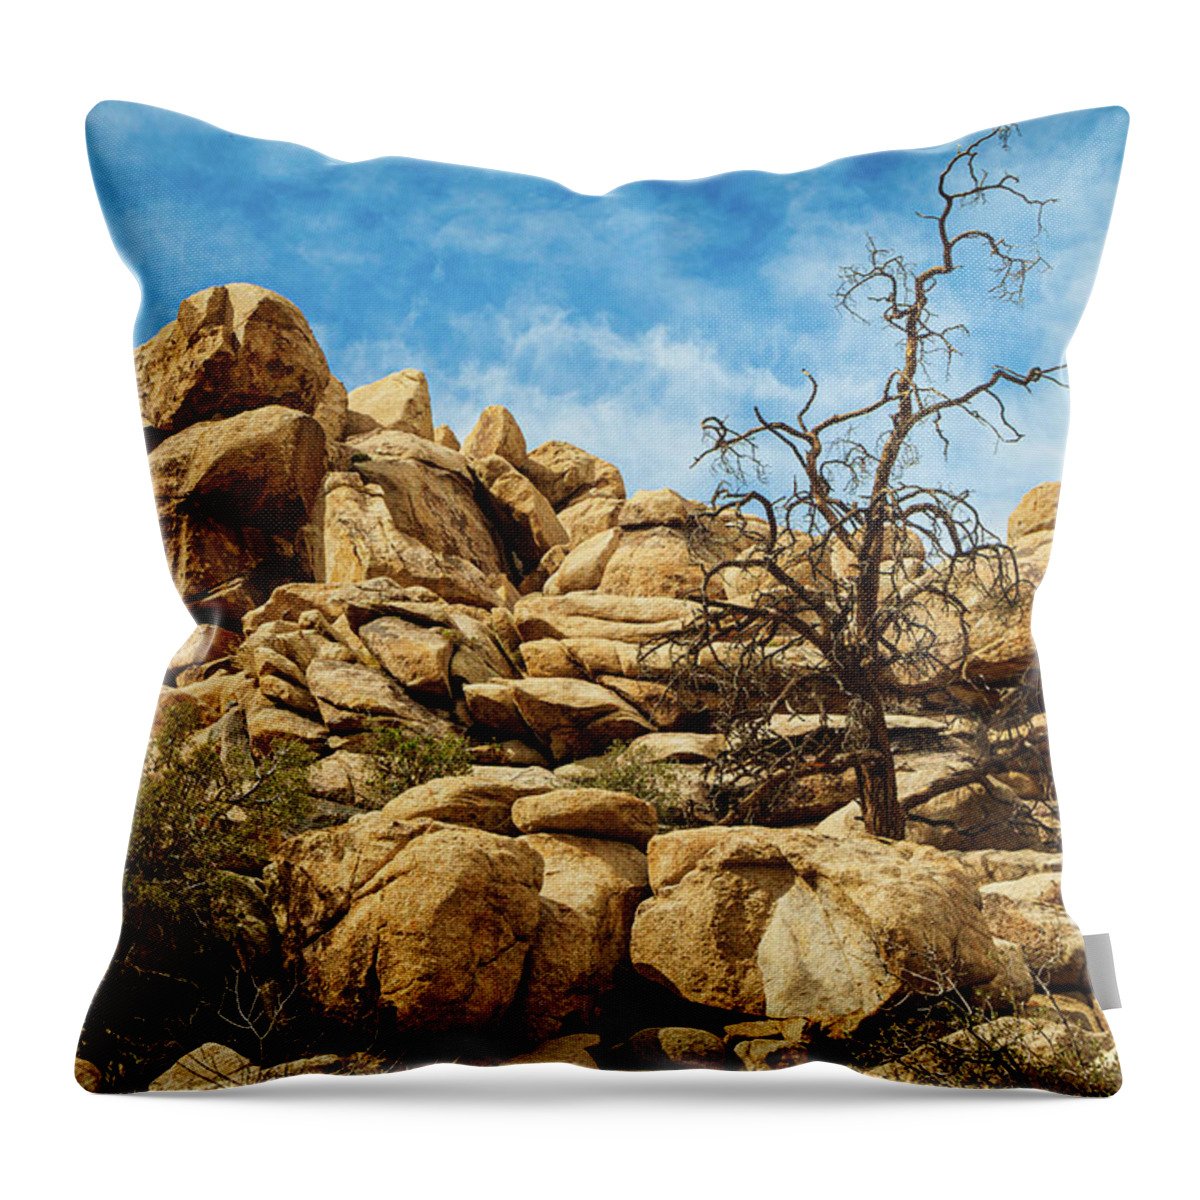 Landscapes Throw Pillow featuring the photograph Needs Water by Claude Dalley